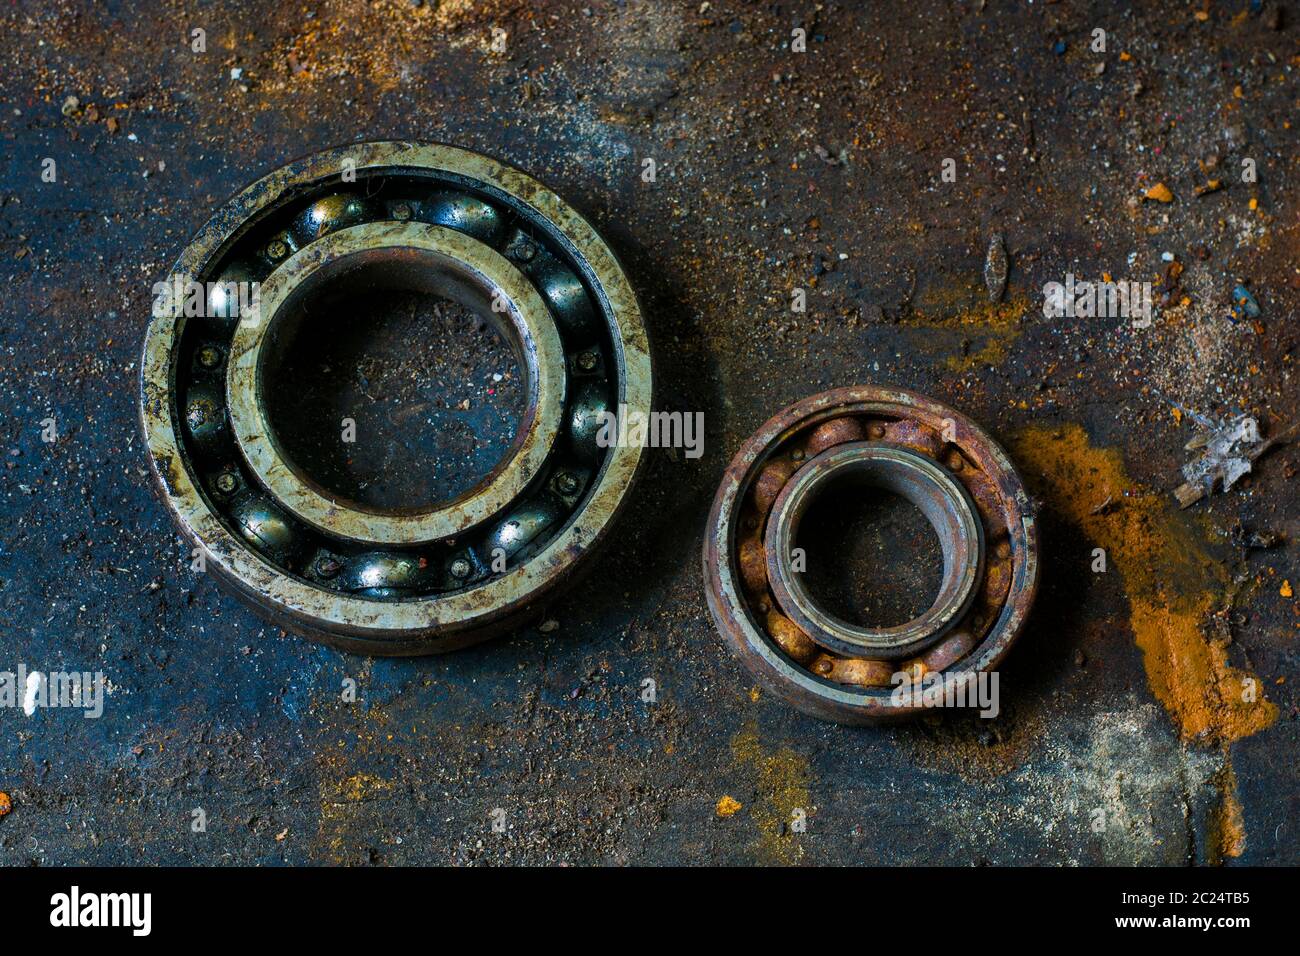 Two old bearing kits rusty and abandoned on a dirty table Stock Photo